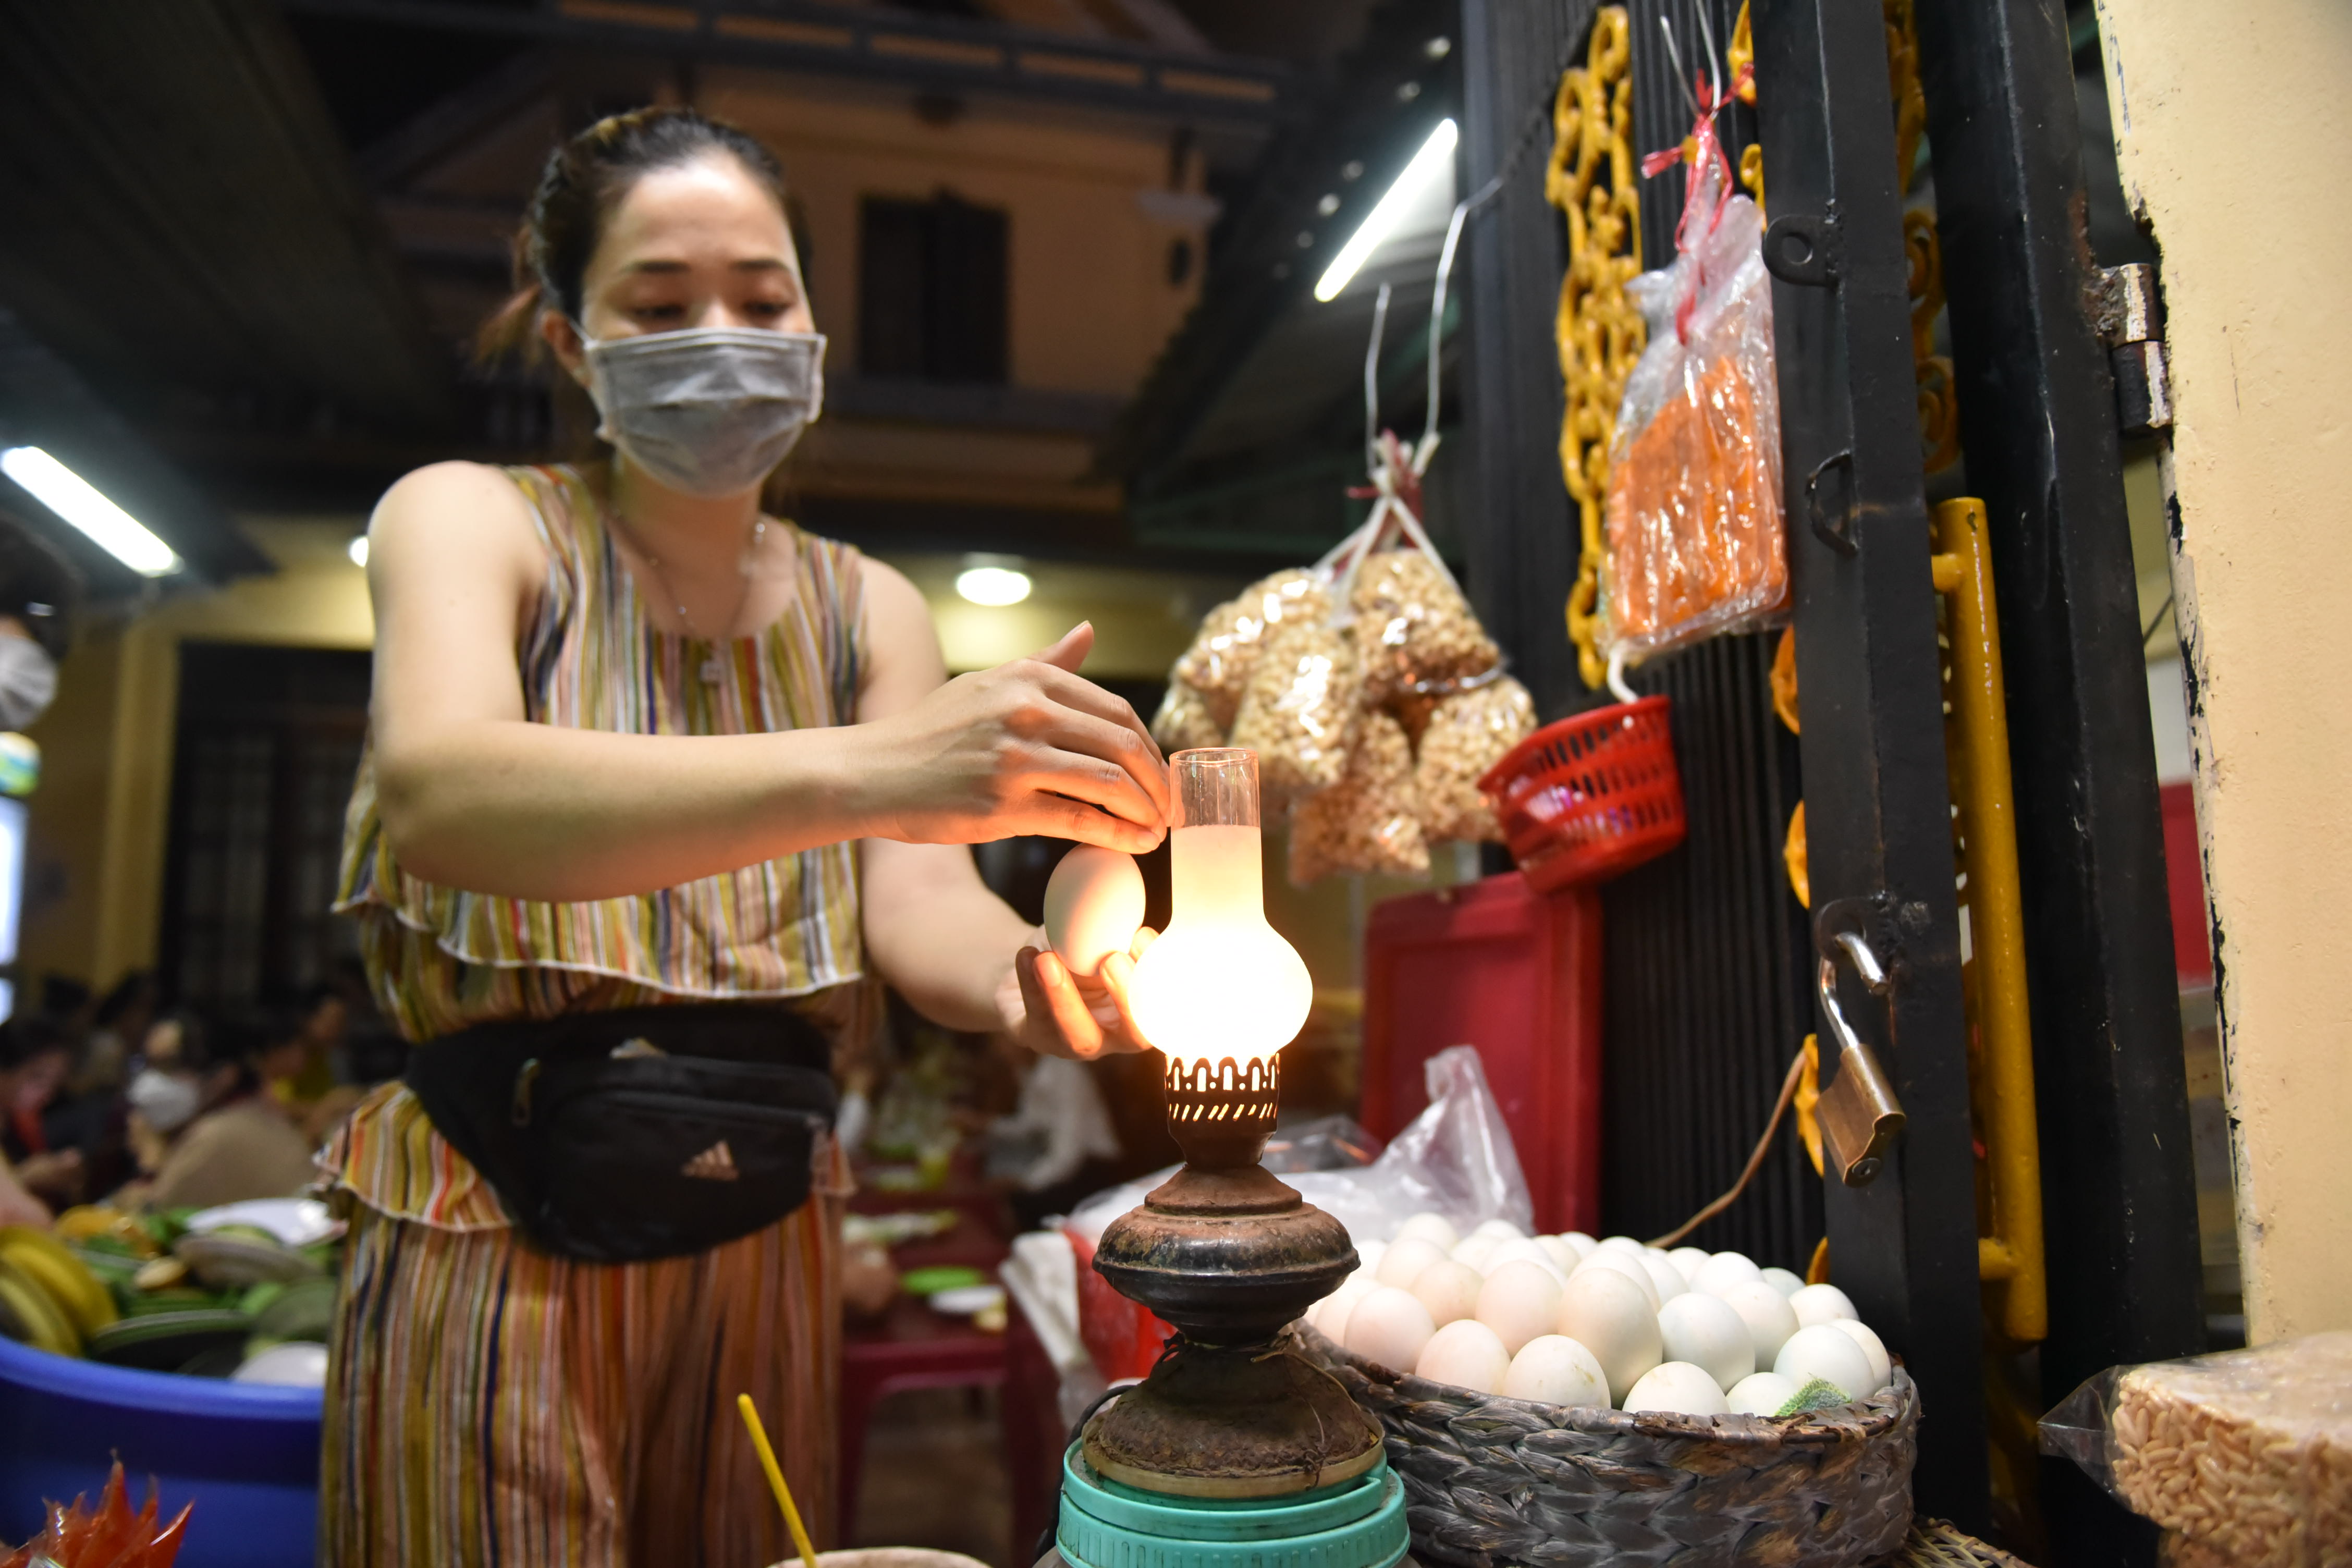 Pham Kim Tinh is seen with an oil lamp passed from her parents at her balut stall in Thao Dien Ward, Thu Duc City. Photo: Ngoc Phuong / Tuoi Tre News